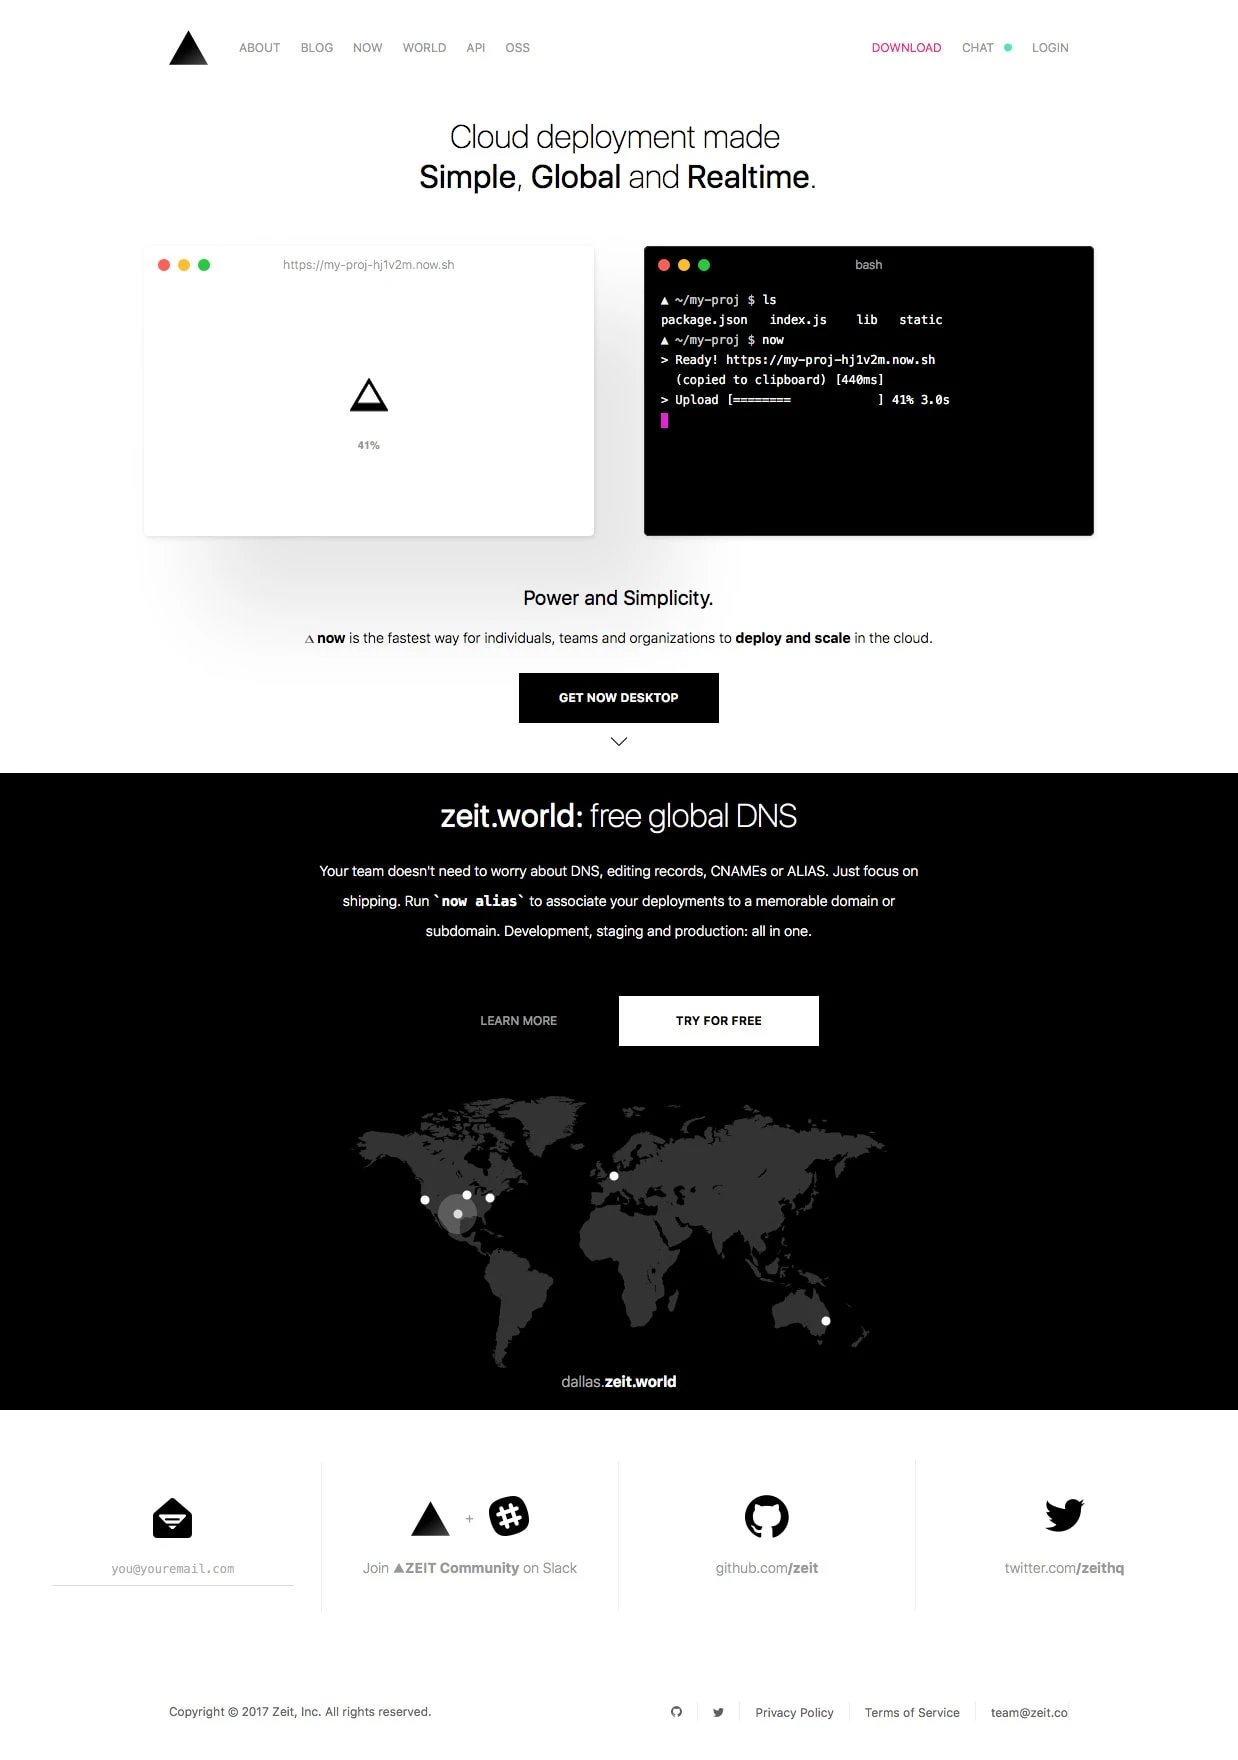 ZEIT Landing Page Example: Cloud deployment made Simple, Global and Realtime